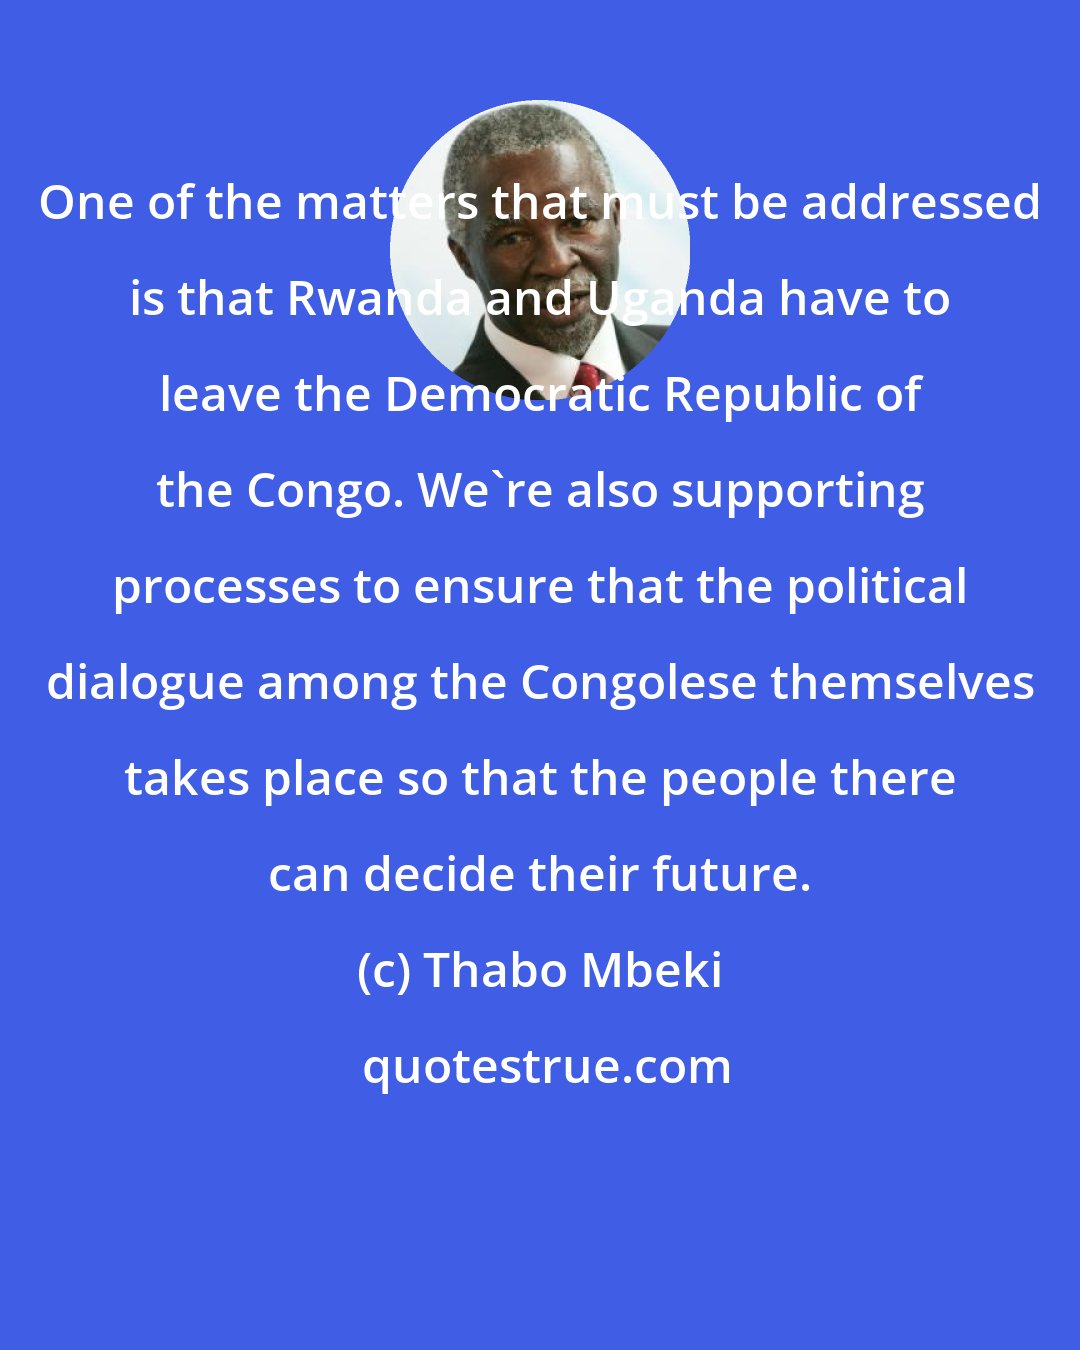 Thabo Mbeki: One of the matters that must be addressed is that Rwanda and Uganda have to leave the Democratic Republic of the Congo. We're also supporting processes to ensure that the political dialogue among the Congolese themselves takes place so that the people there can decide their future.